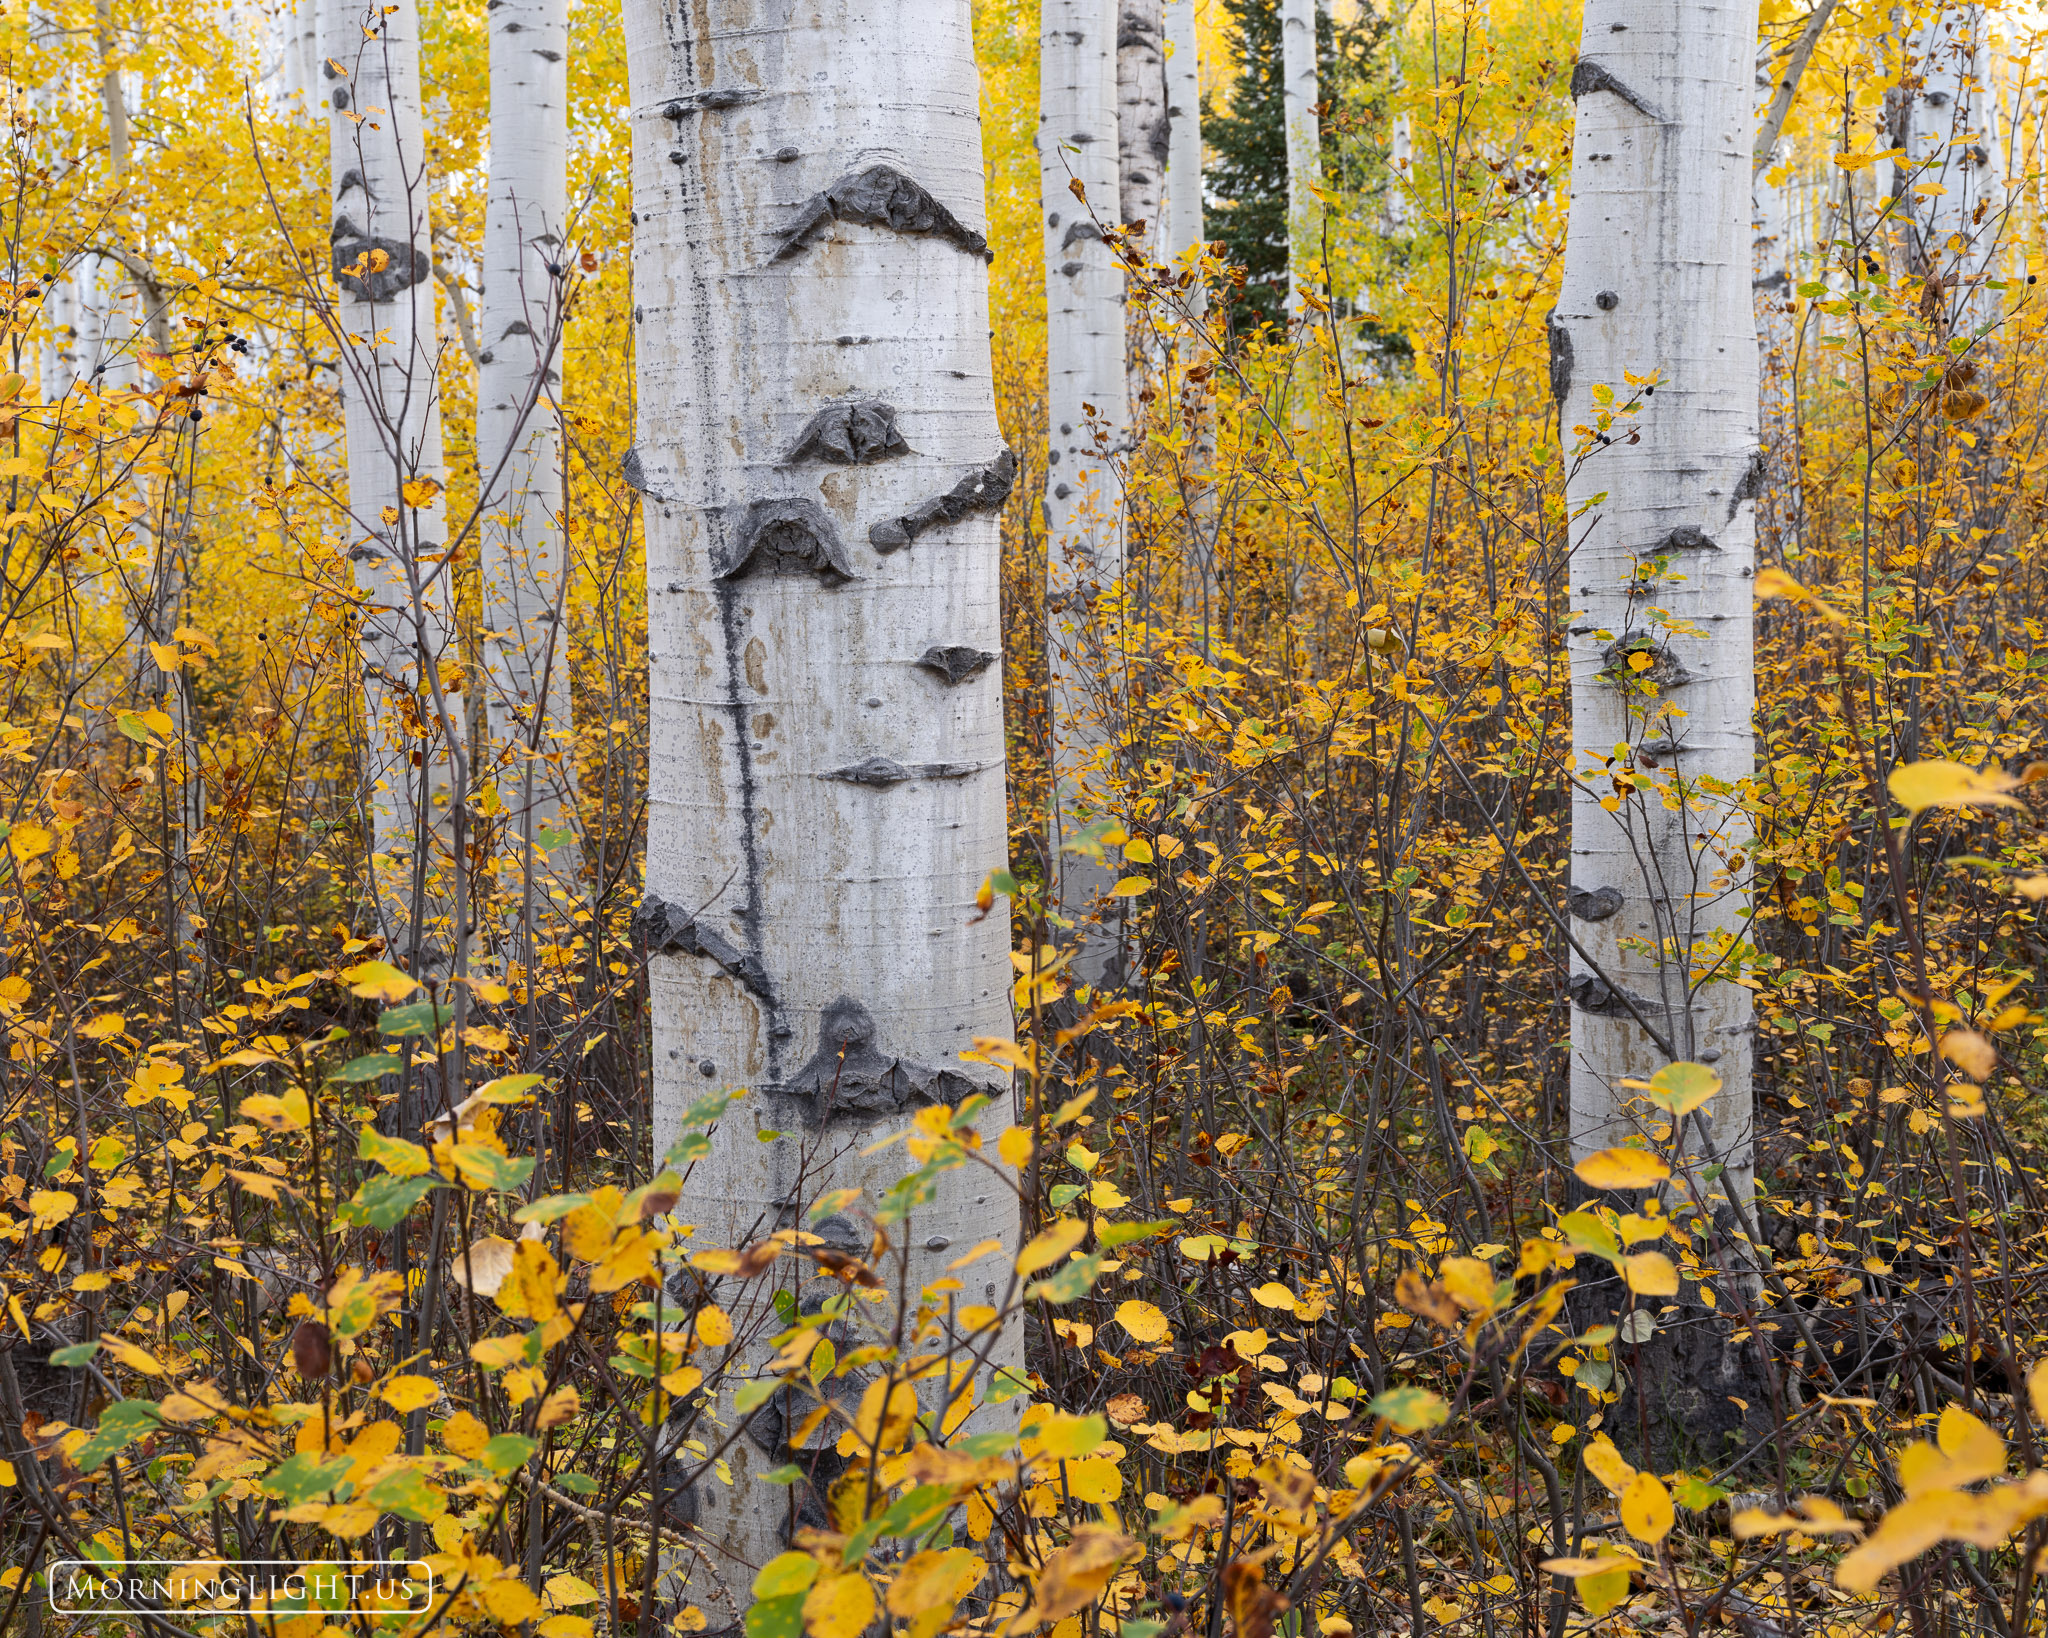 What I found so delightful about this aspen grove were all the new aspen growing alongside and in between the older aspen. The...